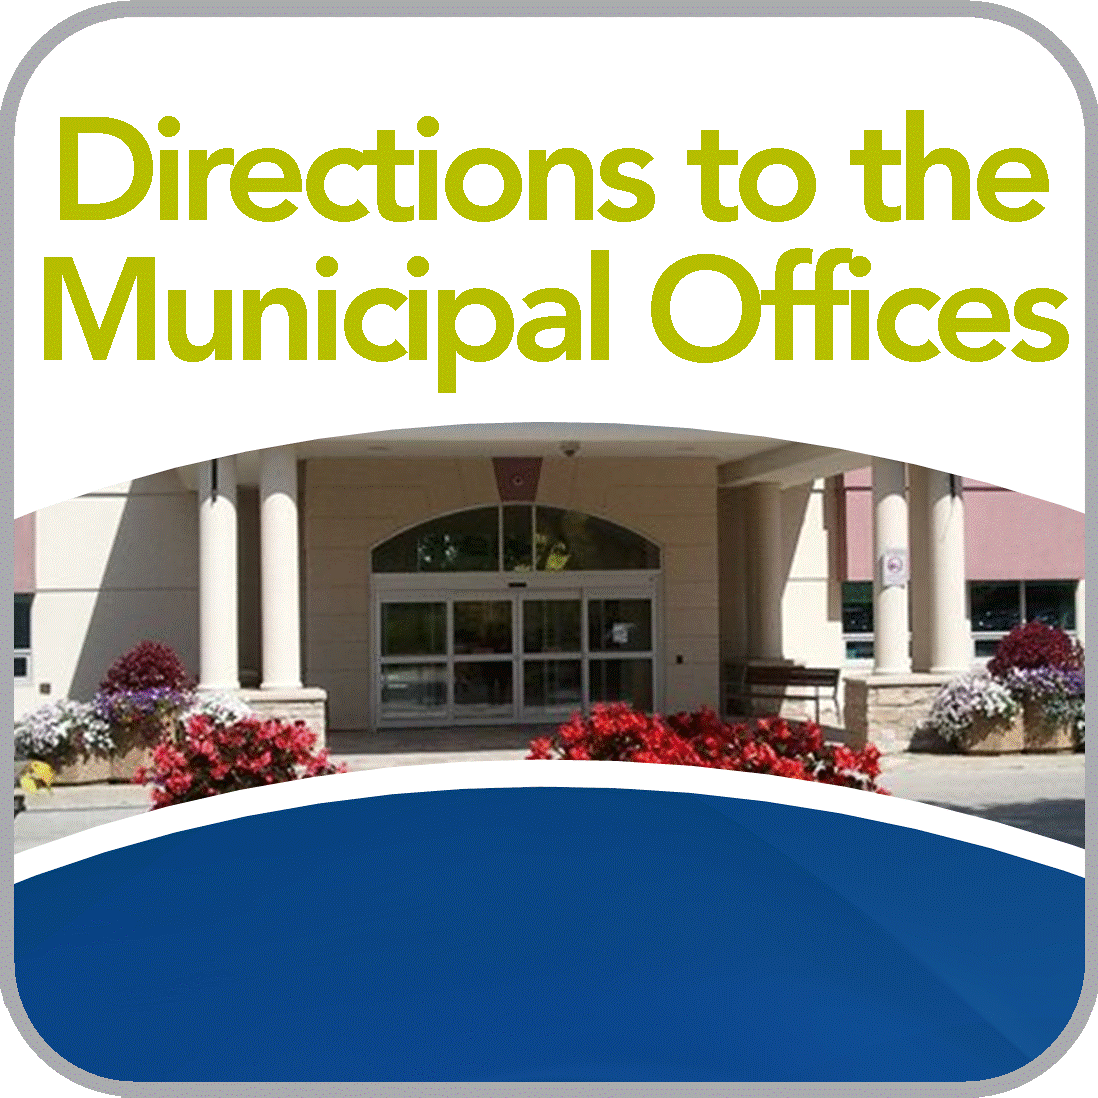 Directions to the Municipal Offices